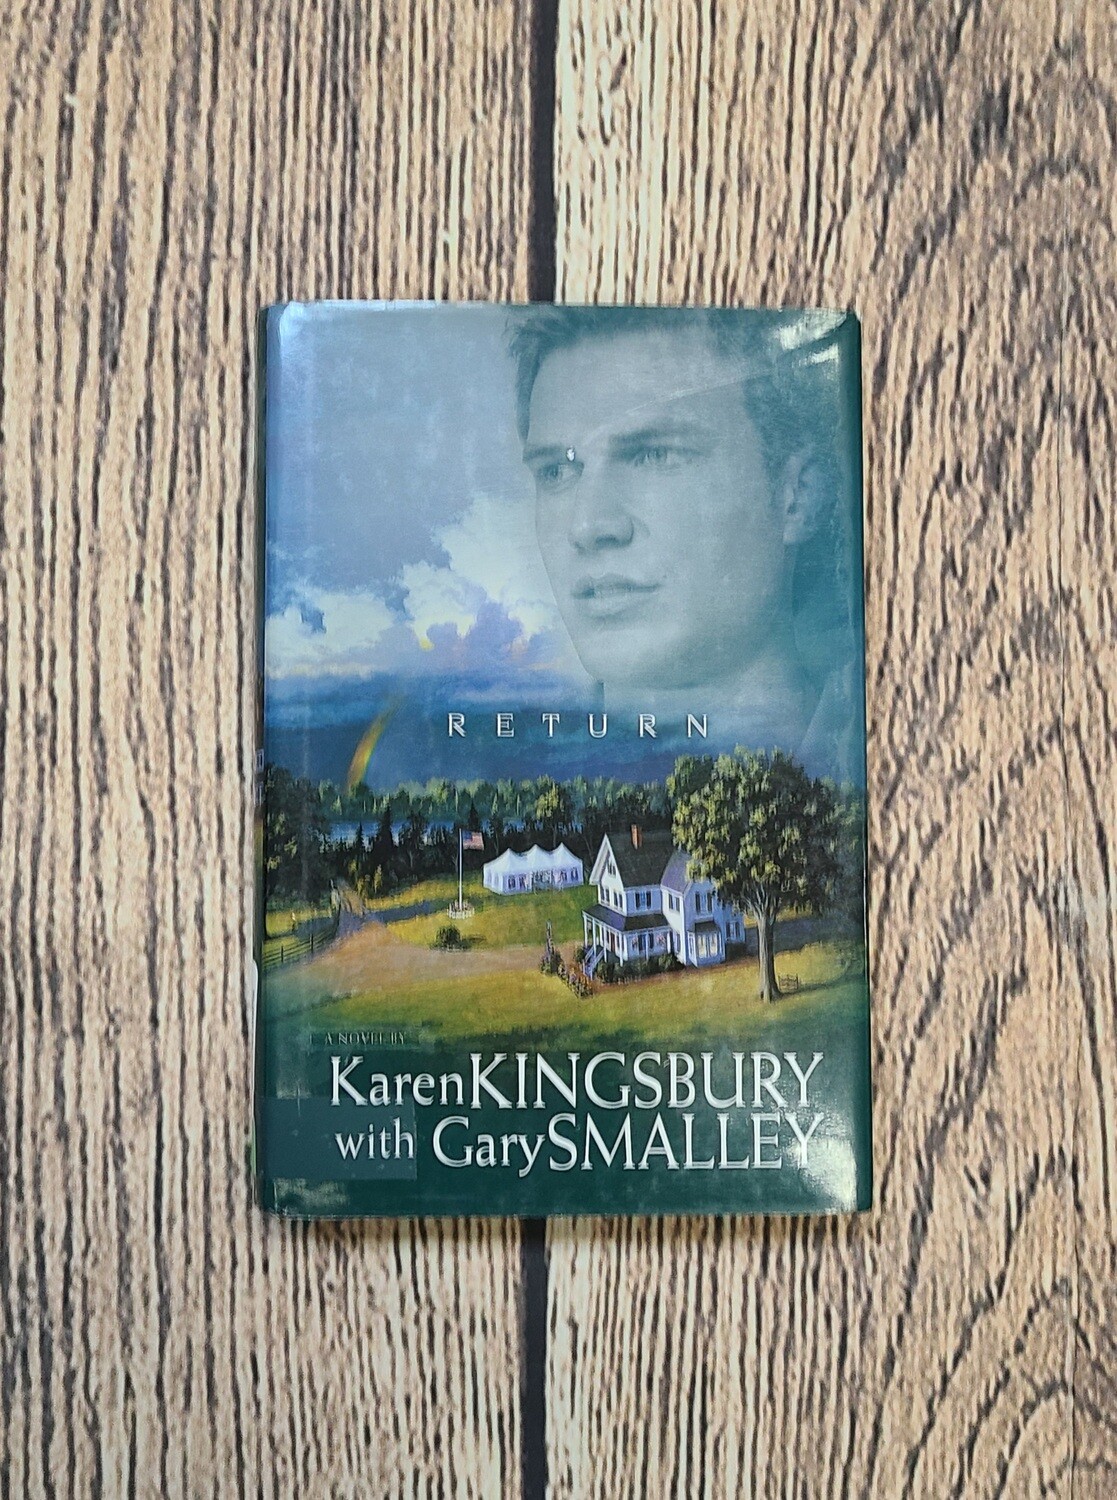 Return by Karen Kingsbury with Gary Smalley - Hardback - Great Condition